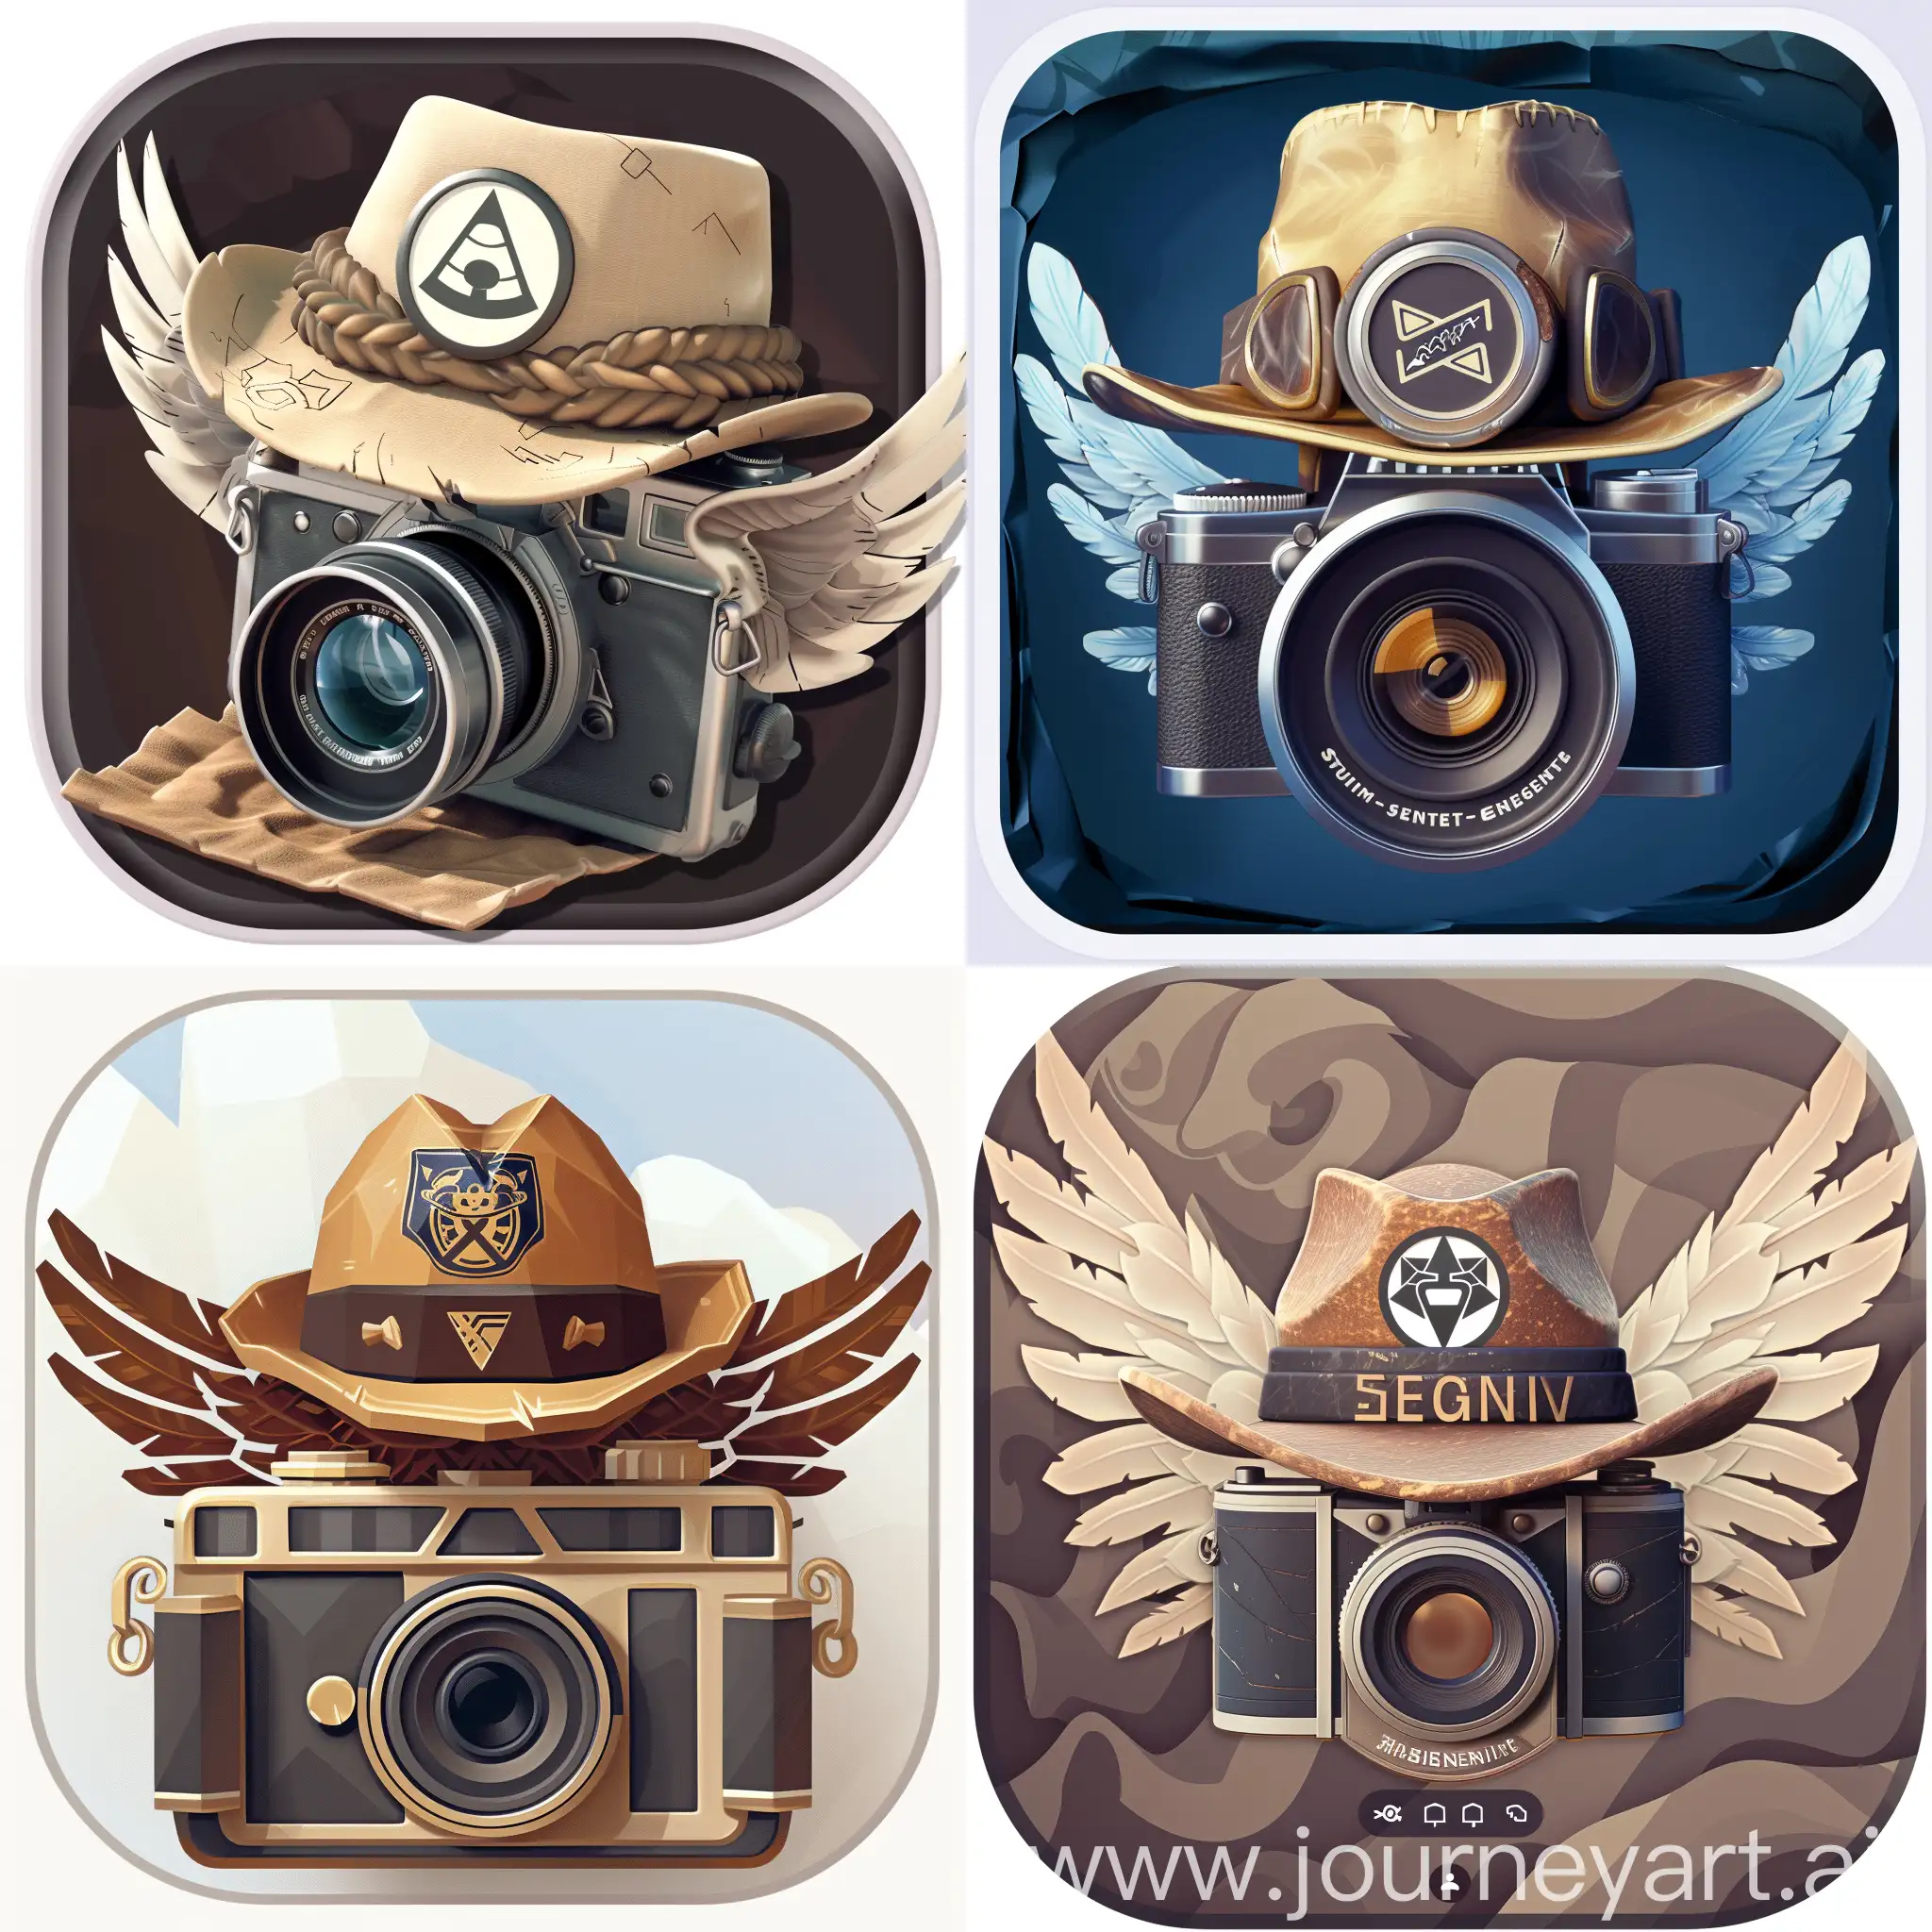 Icon for an app of a vintage movie camera with wings on its sides and an explorer hat with Unity Engine logo on it